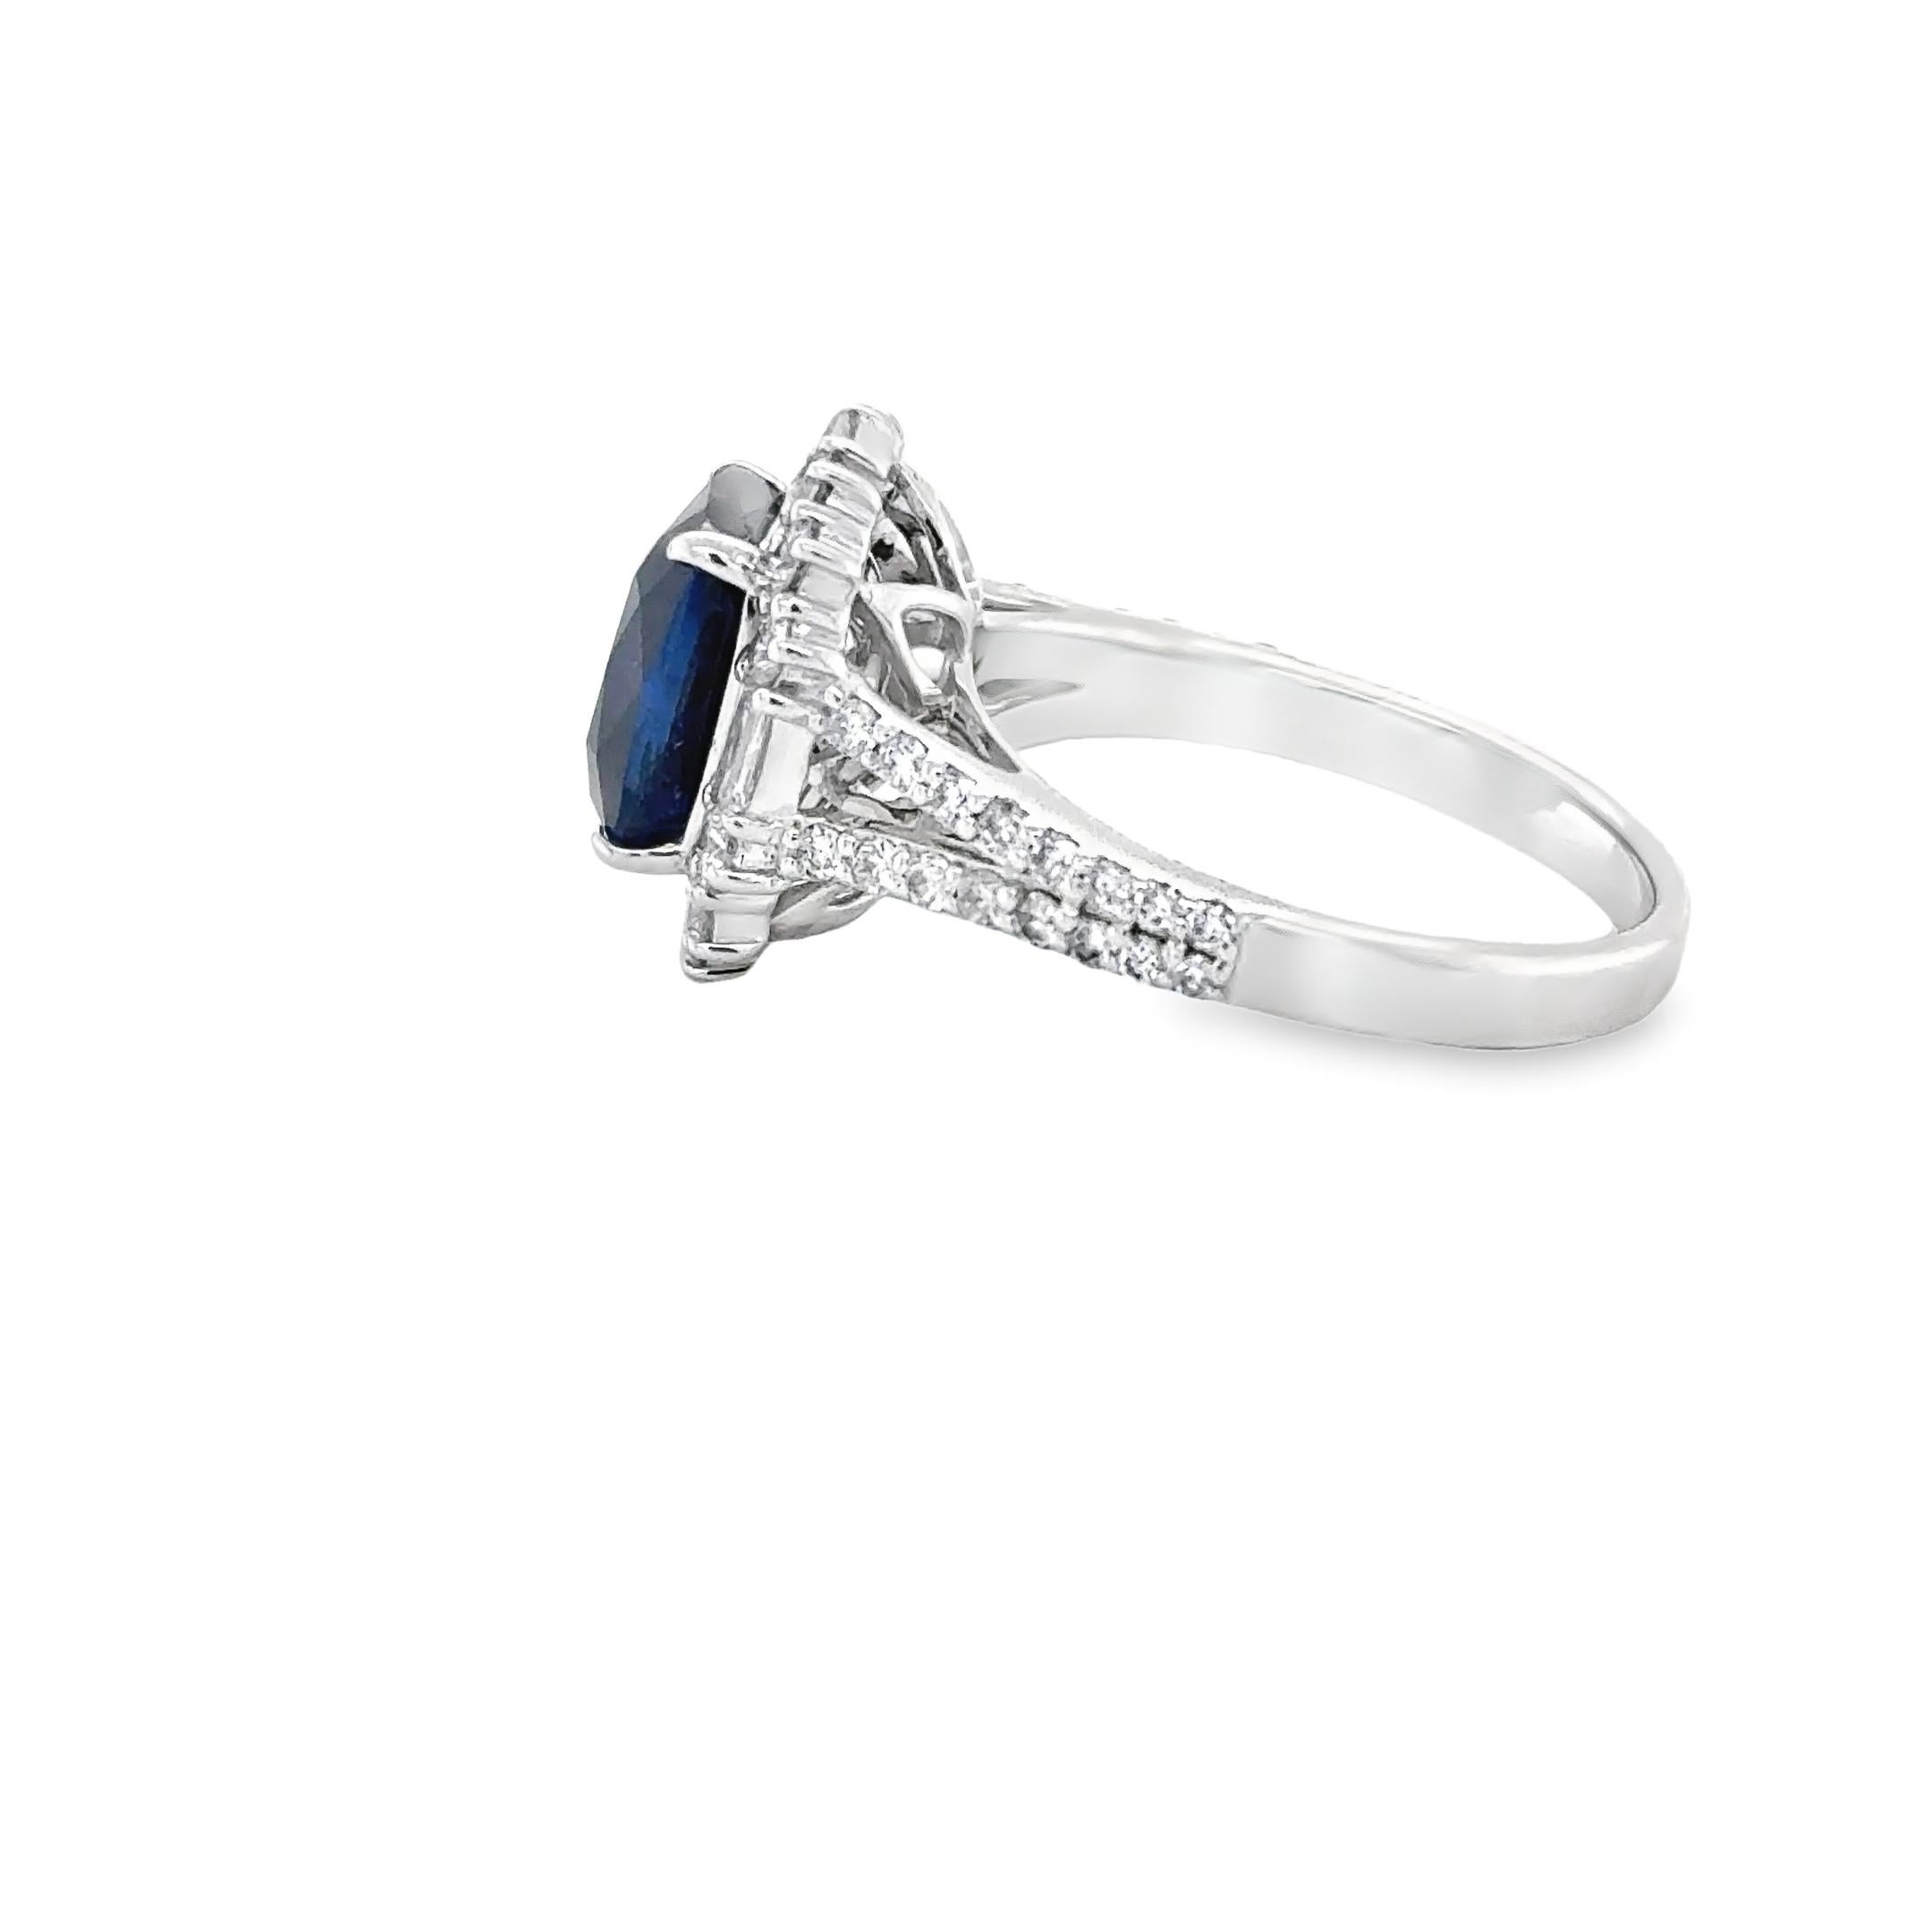 This Gorgeous Cocktail ring is set with a royal blue sapphire weighing 4.30cts , open back setting. The gemstone is perfectly set in the centre of a beautiful cluster of 48 Baguette & Round round shaped diamonds weighing an approximate total weight